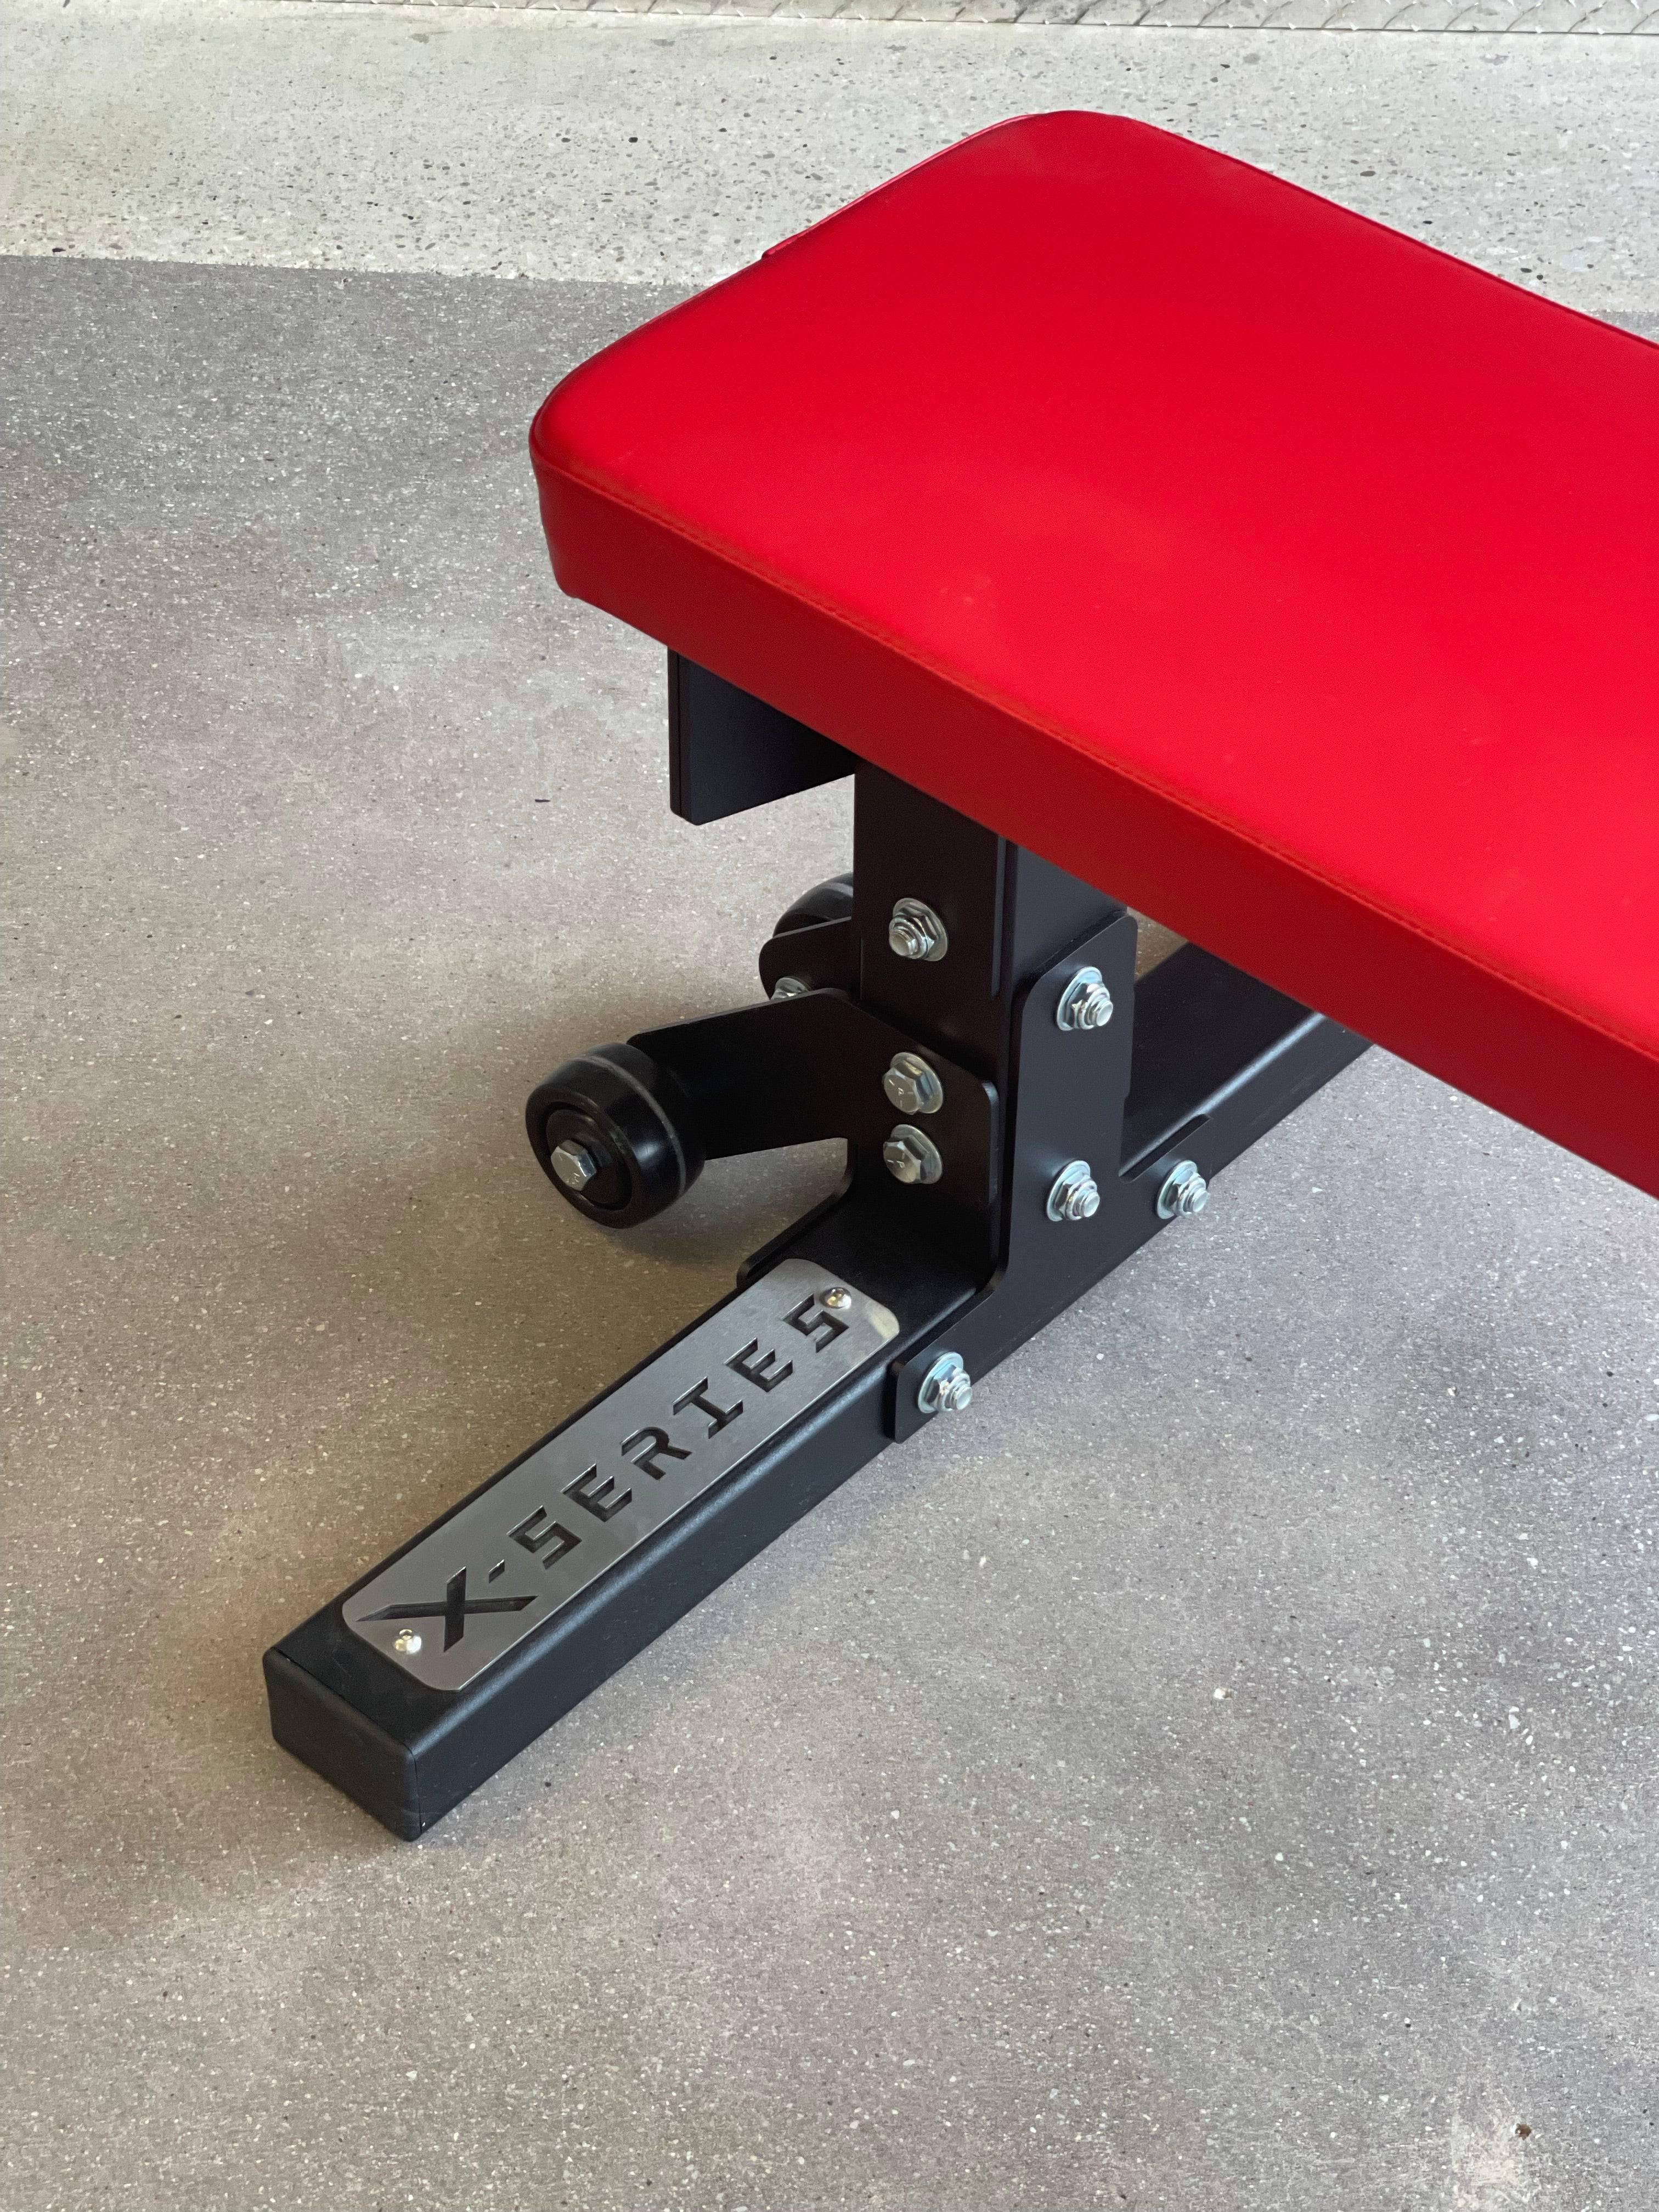 XTC Gear | X-Series Flat Bench v5 - XTC Fitness - Exercise Equipment Superstore - Canada - Flat Bench